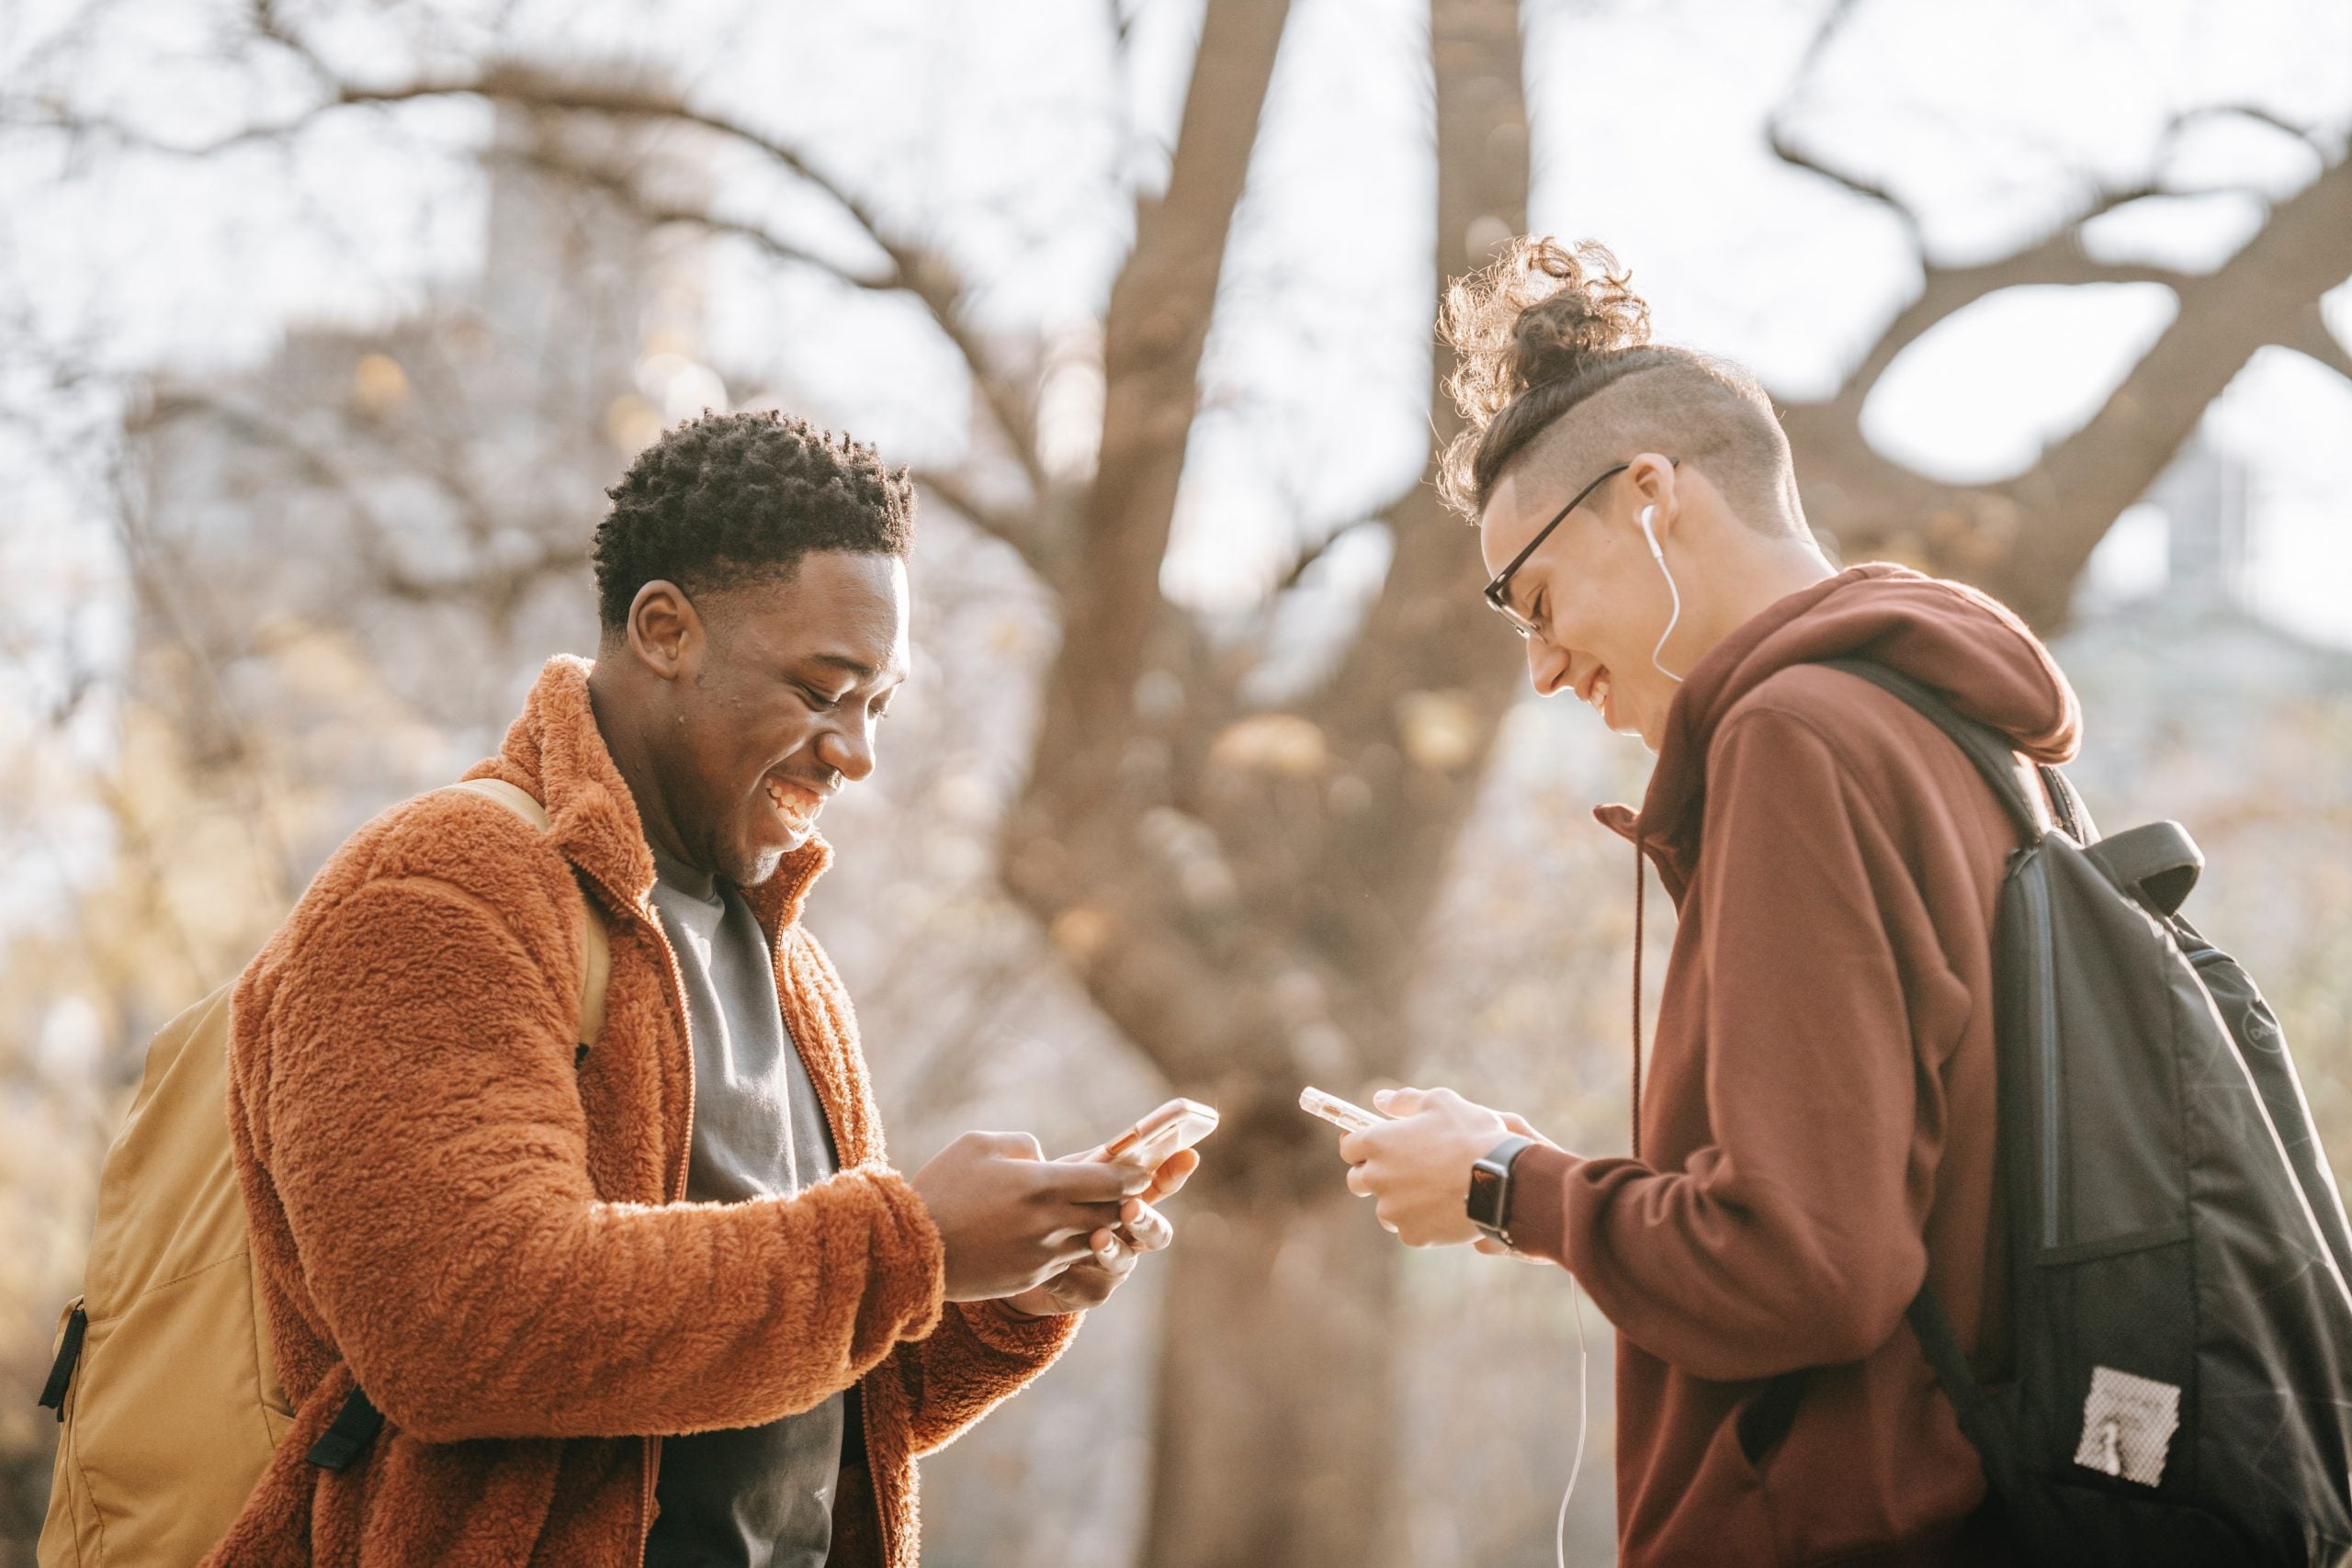 A picture of two friends sharing contact details on their phones as this article is about the Top Twitter accounts to follow for cybersecurity expertise, news, and the latest commentary.